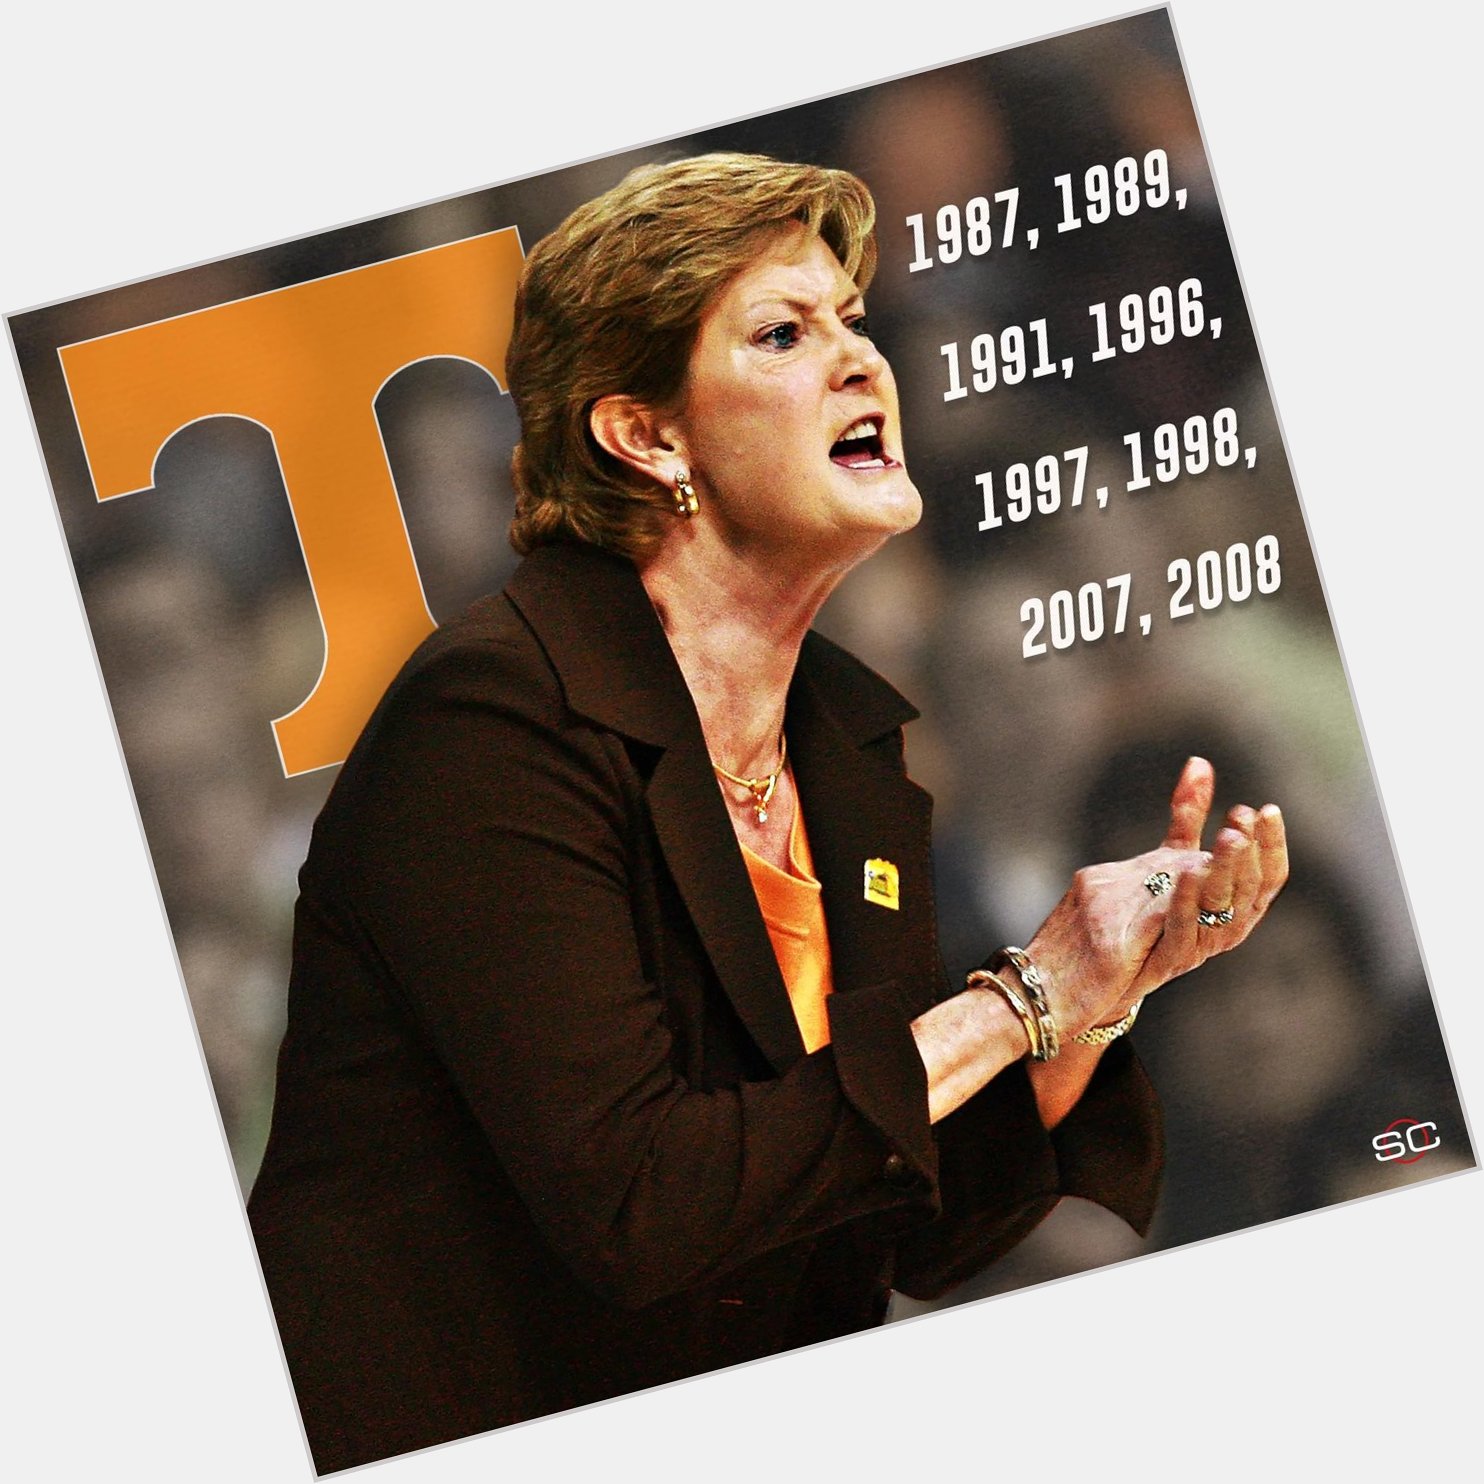 Happy birthday to the greatest of all time, Coach Pat Summitt! 